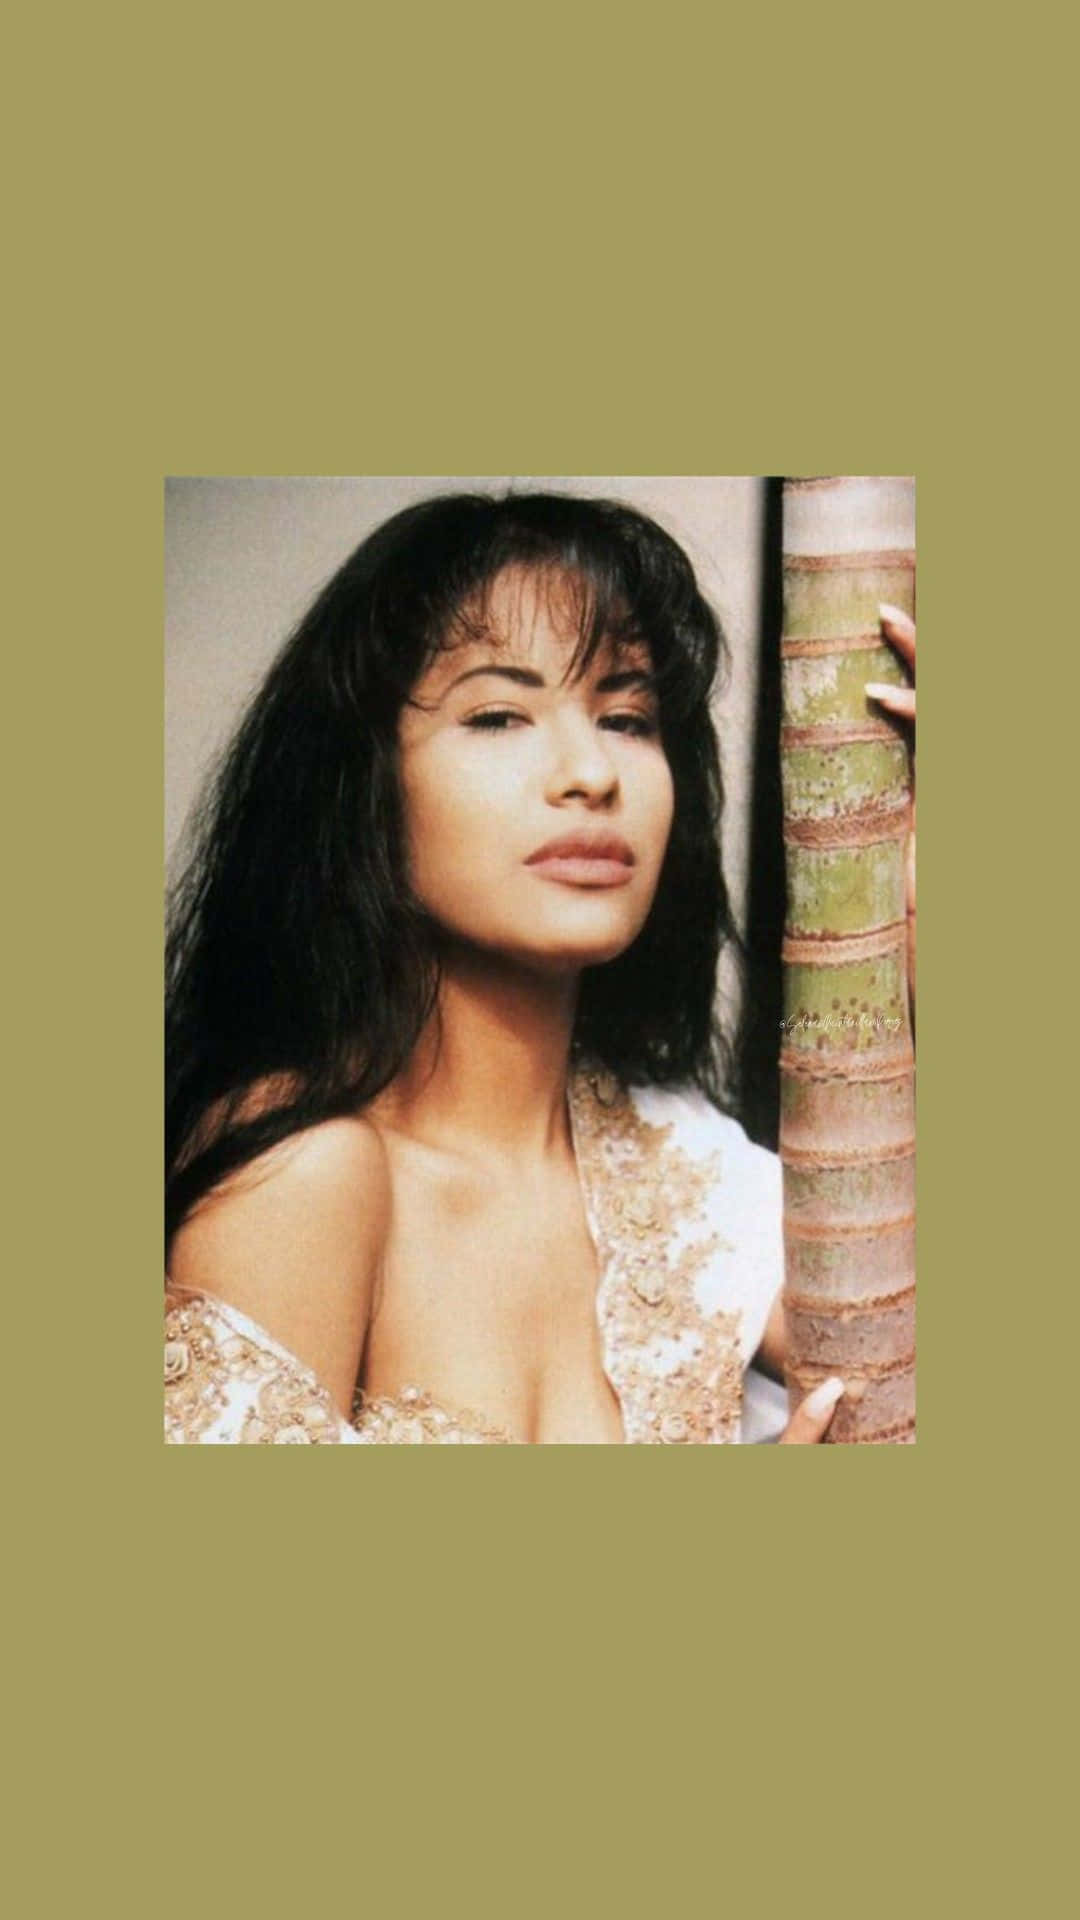 Women empowerment with Selena Quintanilla's iconic image on your iPhone Wallpaper